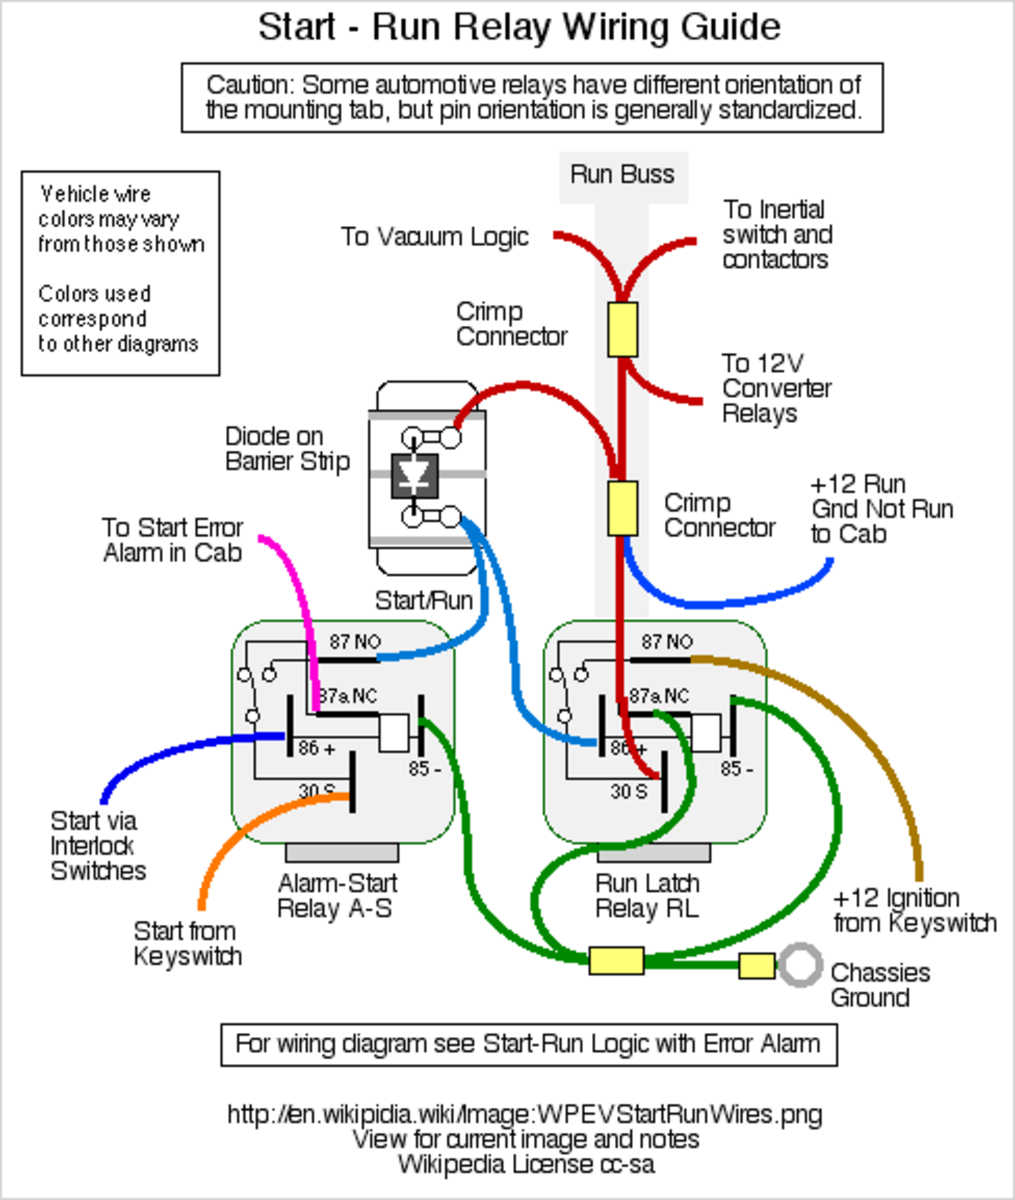 A wiring diagram can help locate potential trouble points on a circuit.